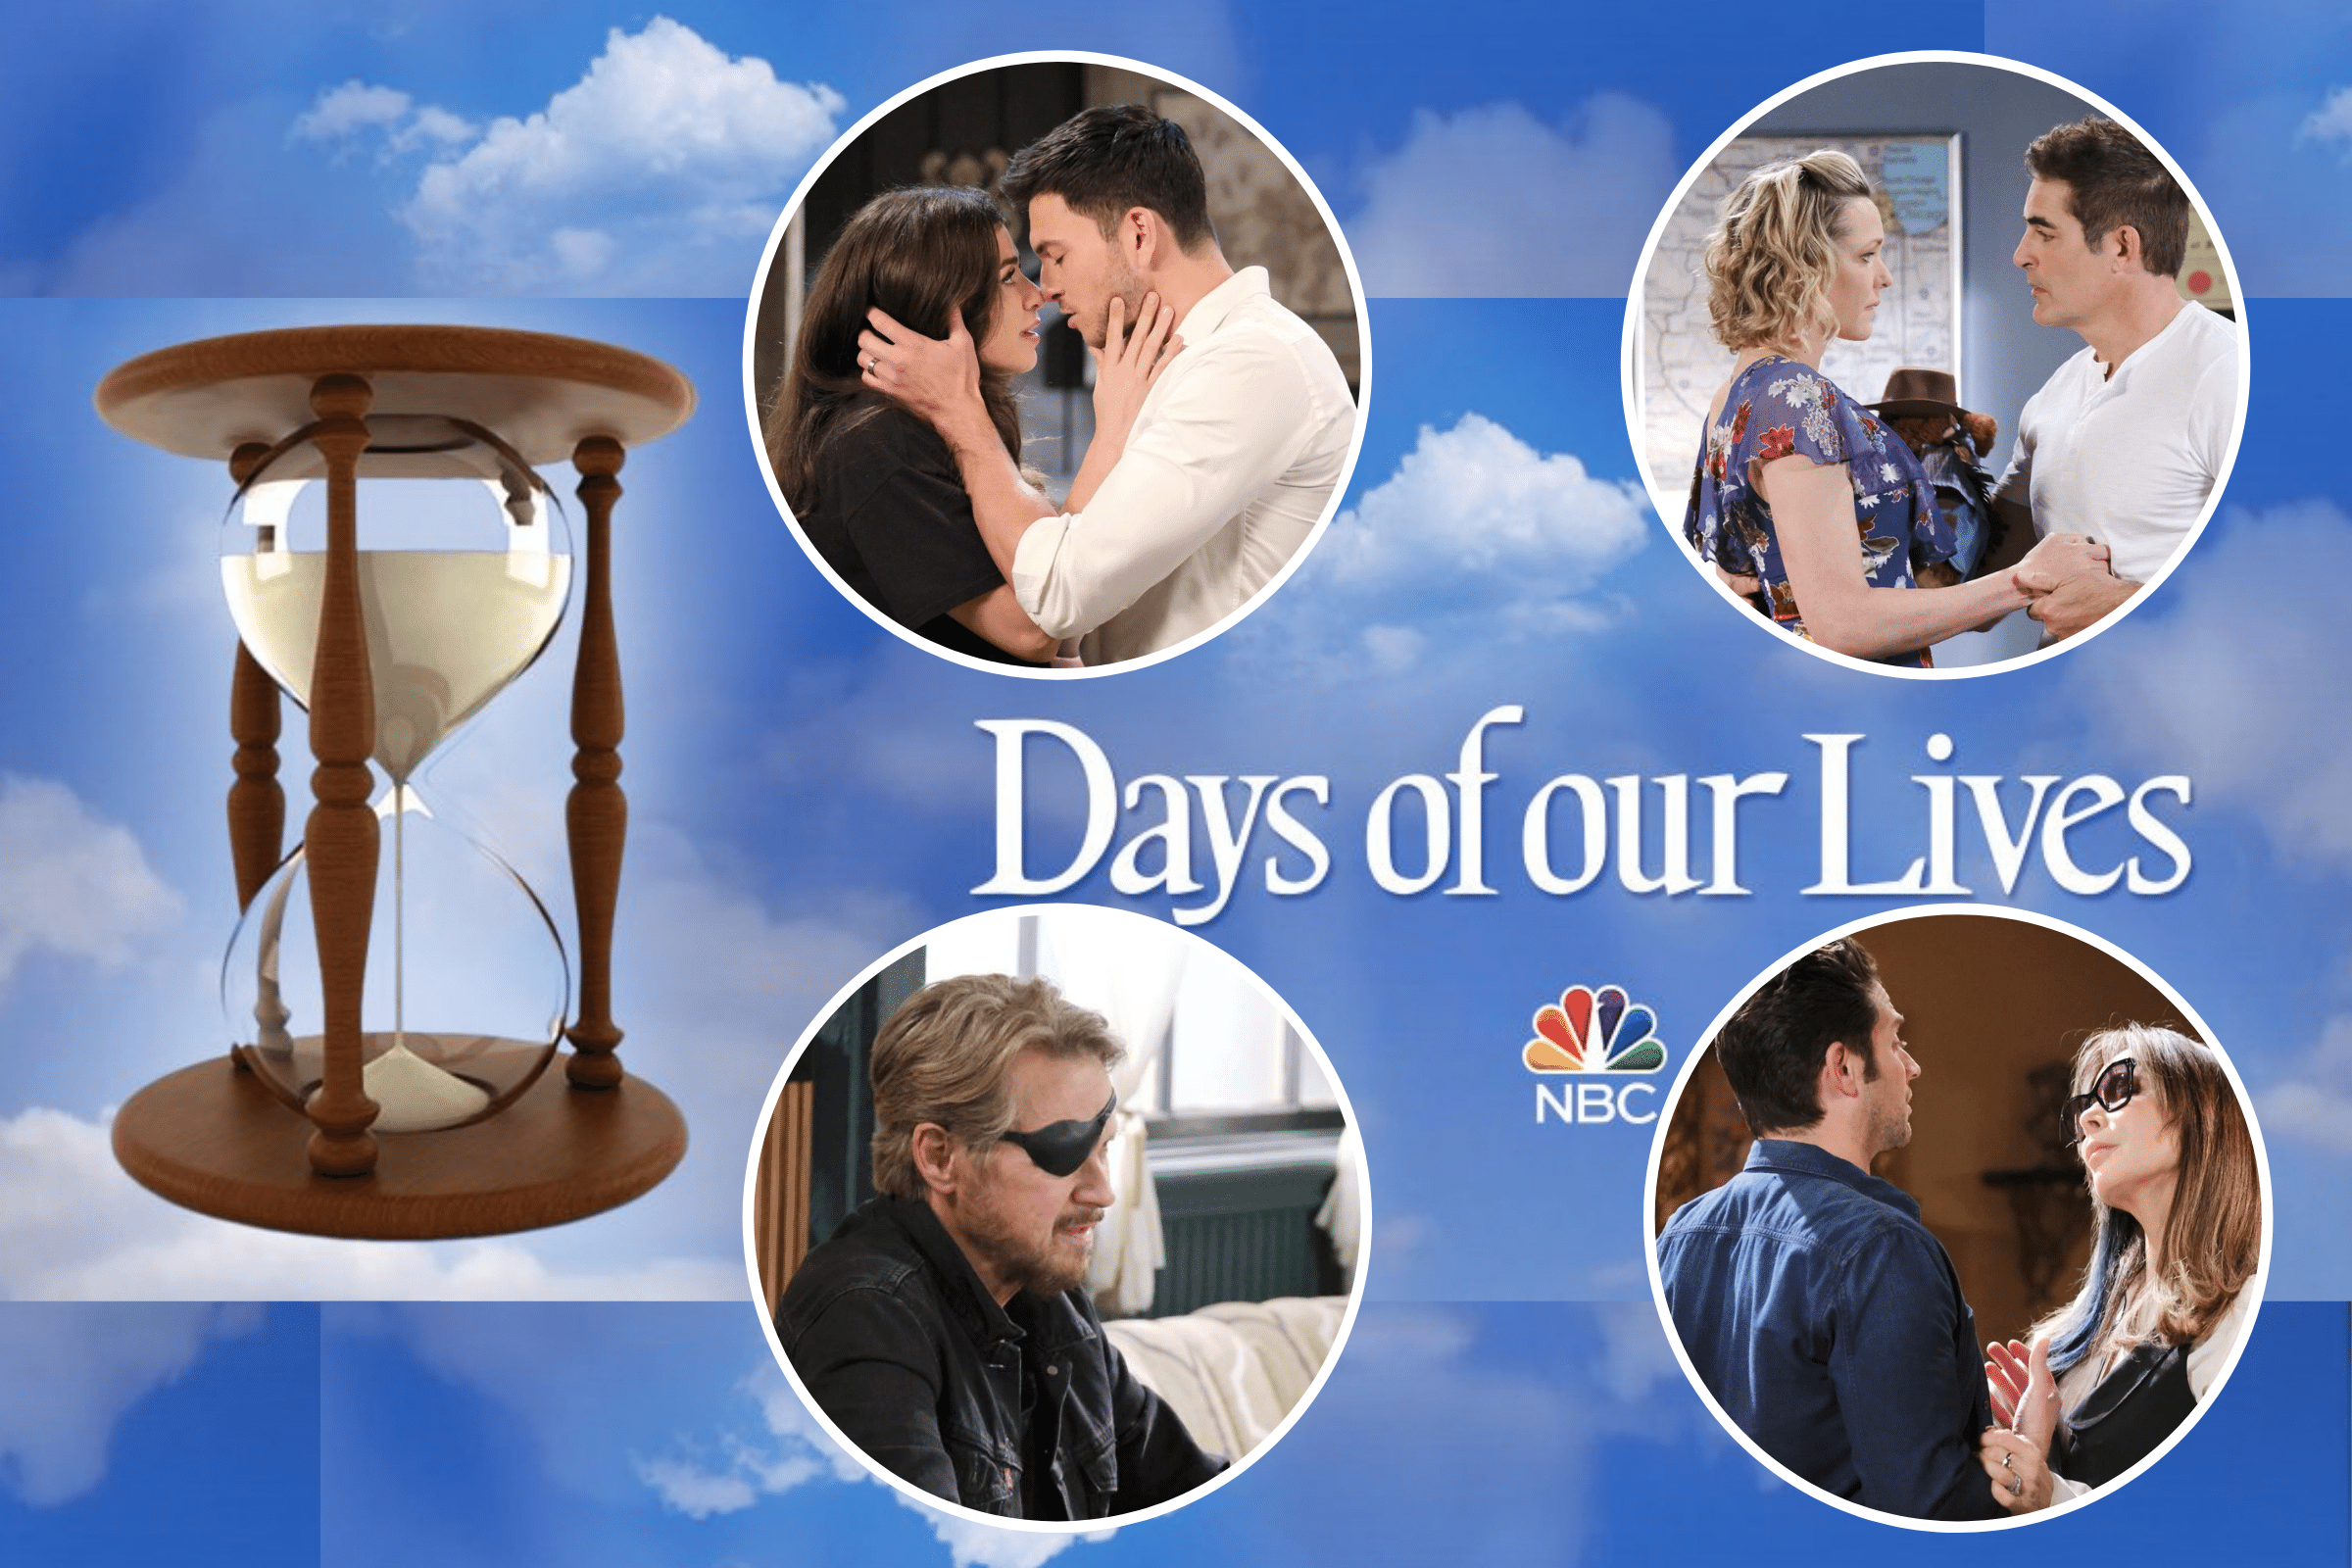 'Days of Our Lives' Streaming Jump Marks End of Soap Operas on NBC